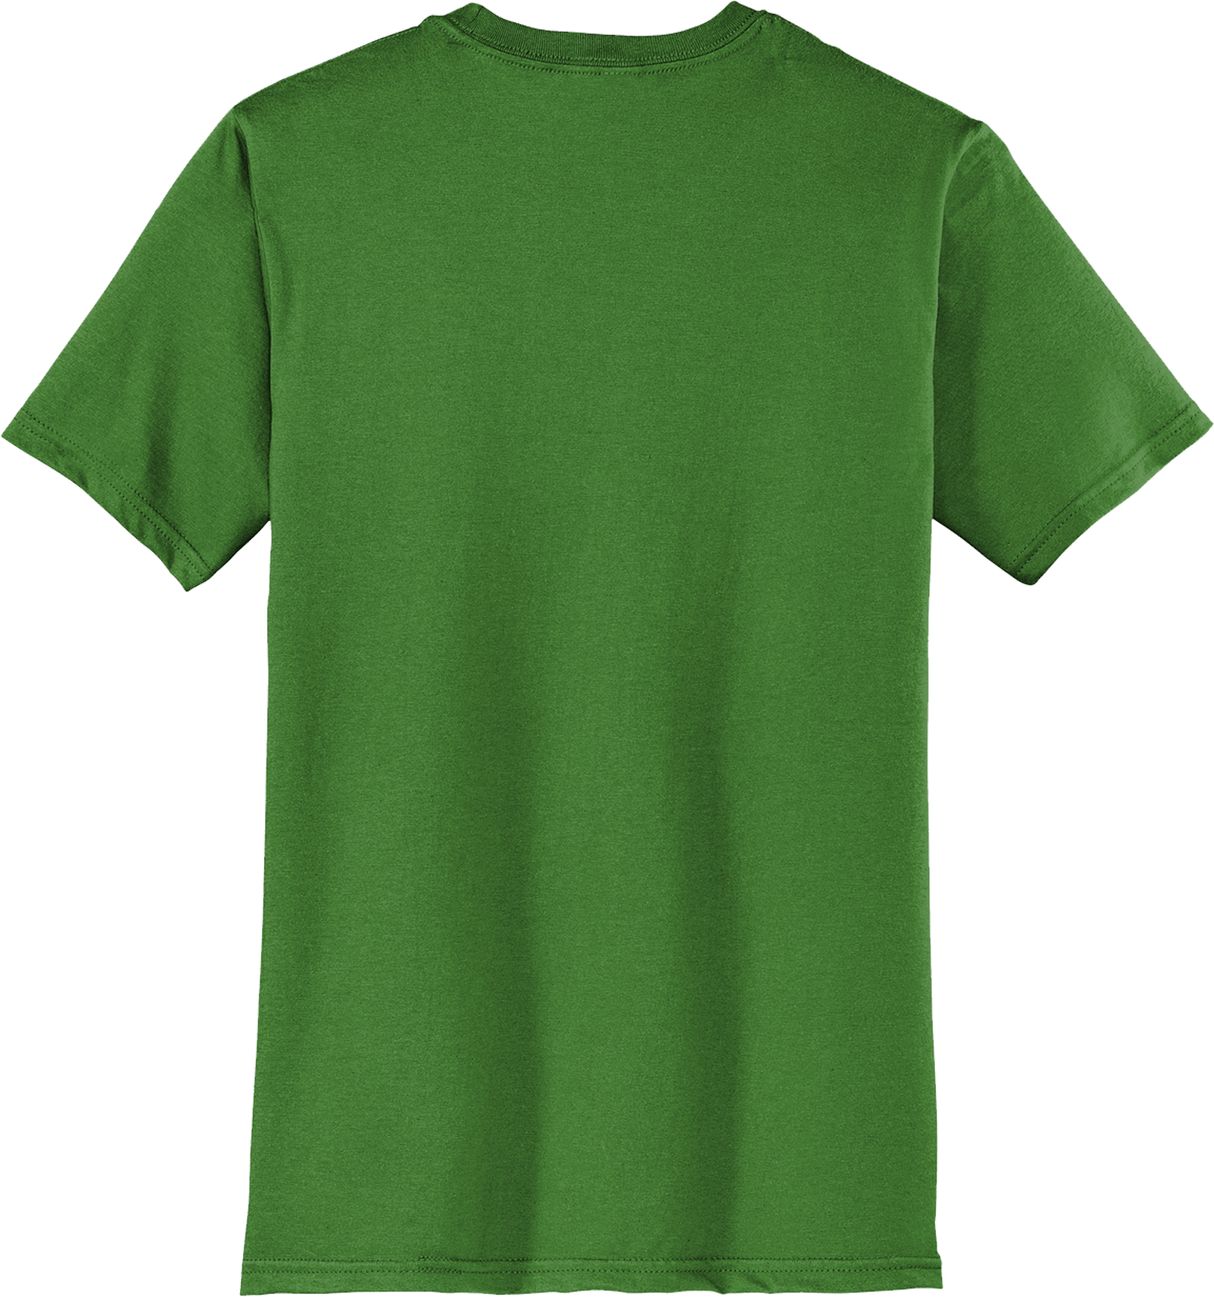 DraftKings Vermont Sportsbook T-Shirt